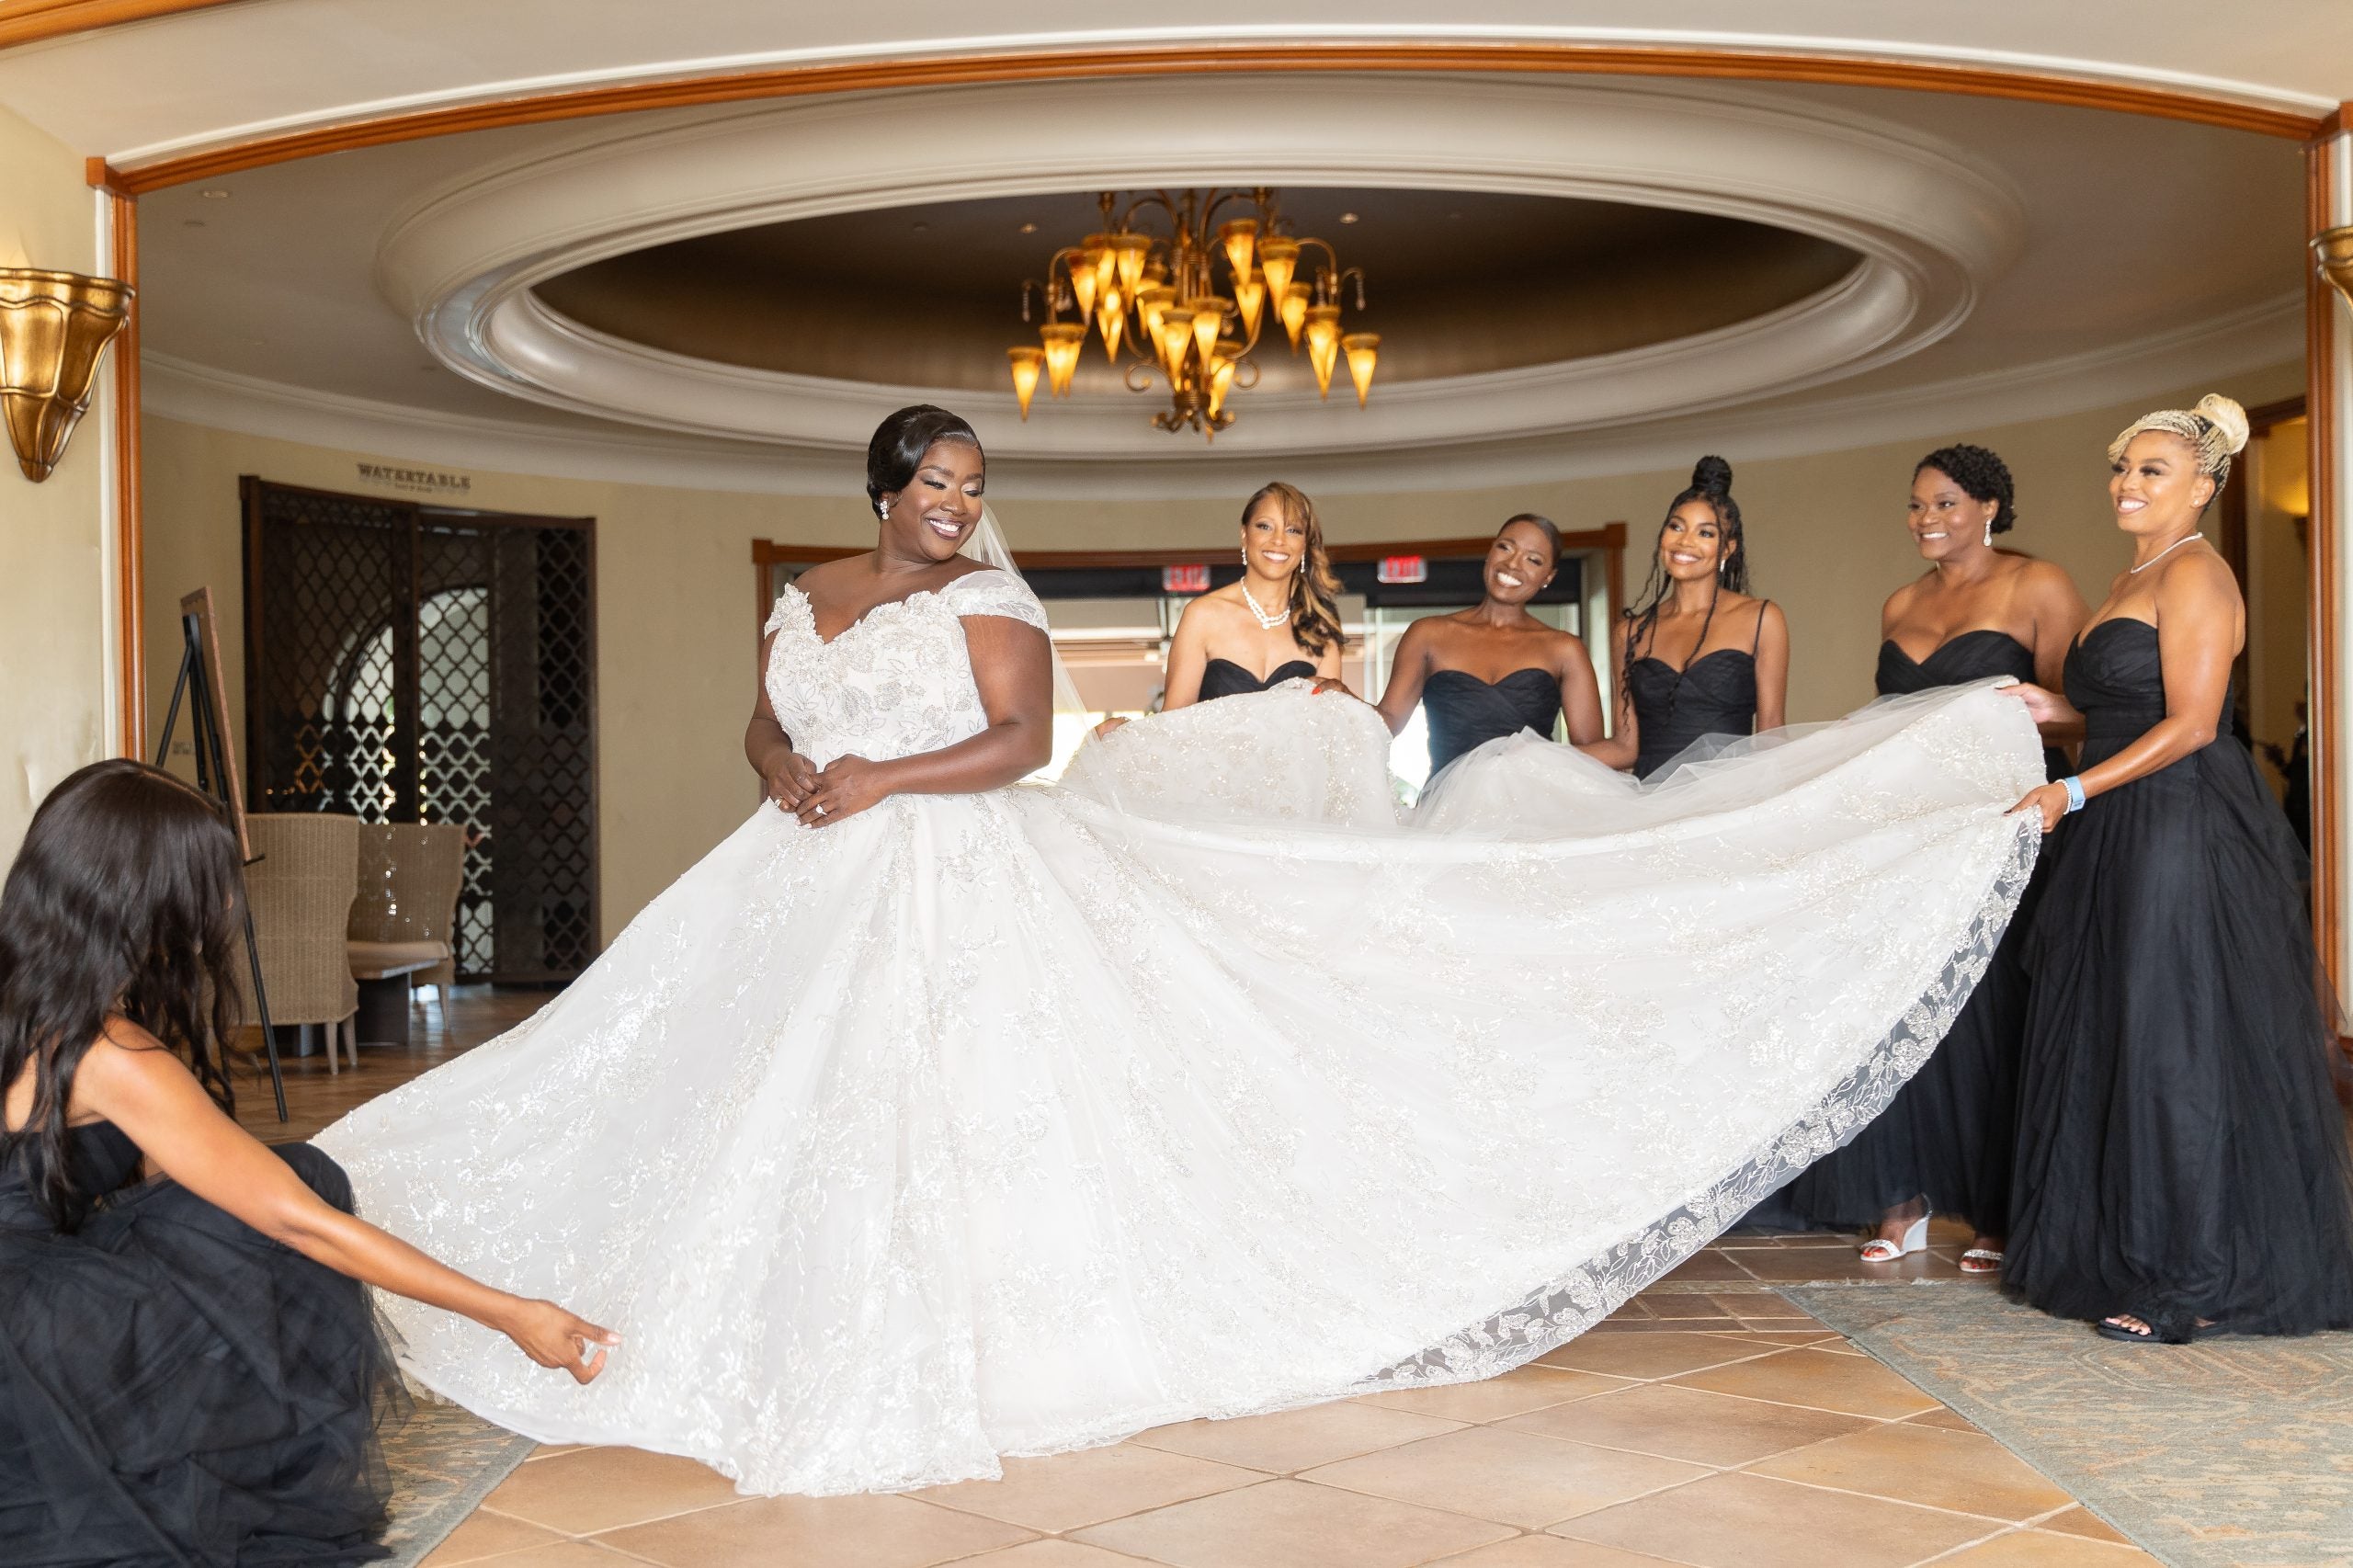 Bridal Bliss: Kelley And Moreno's Vintage Black Hollywood Themed Wedding Brought Out The Stars Of Today